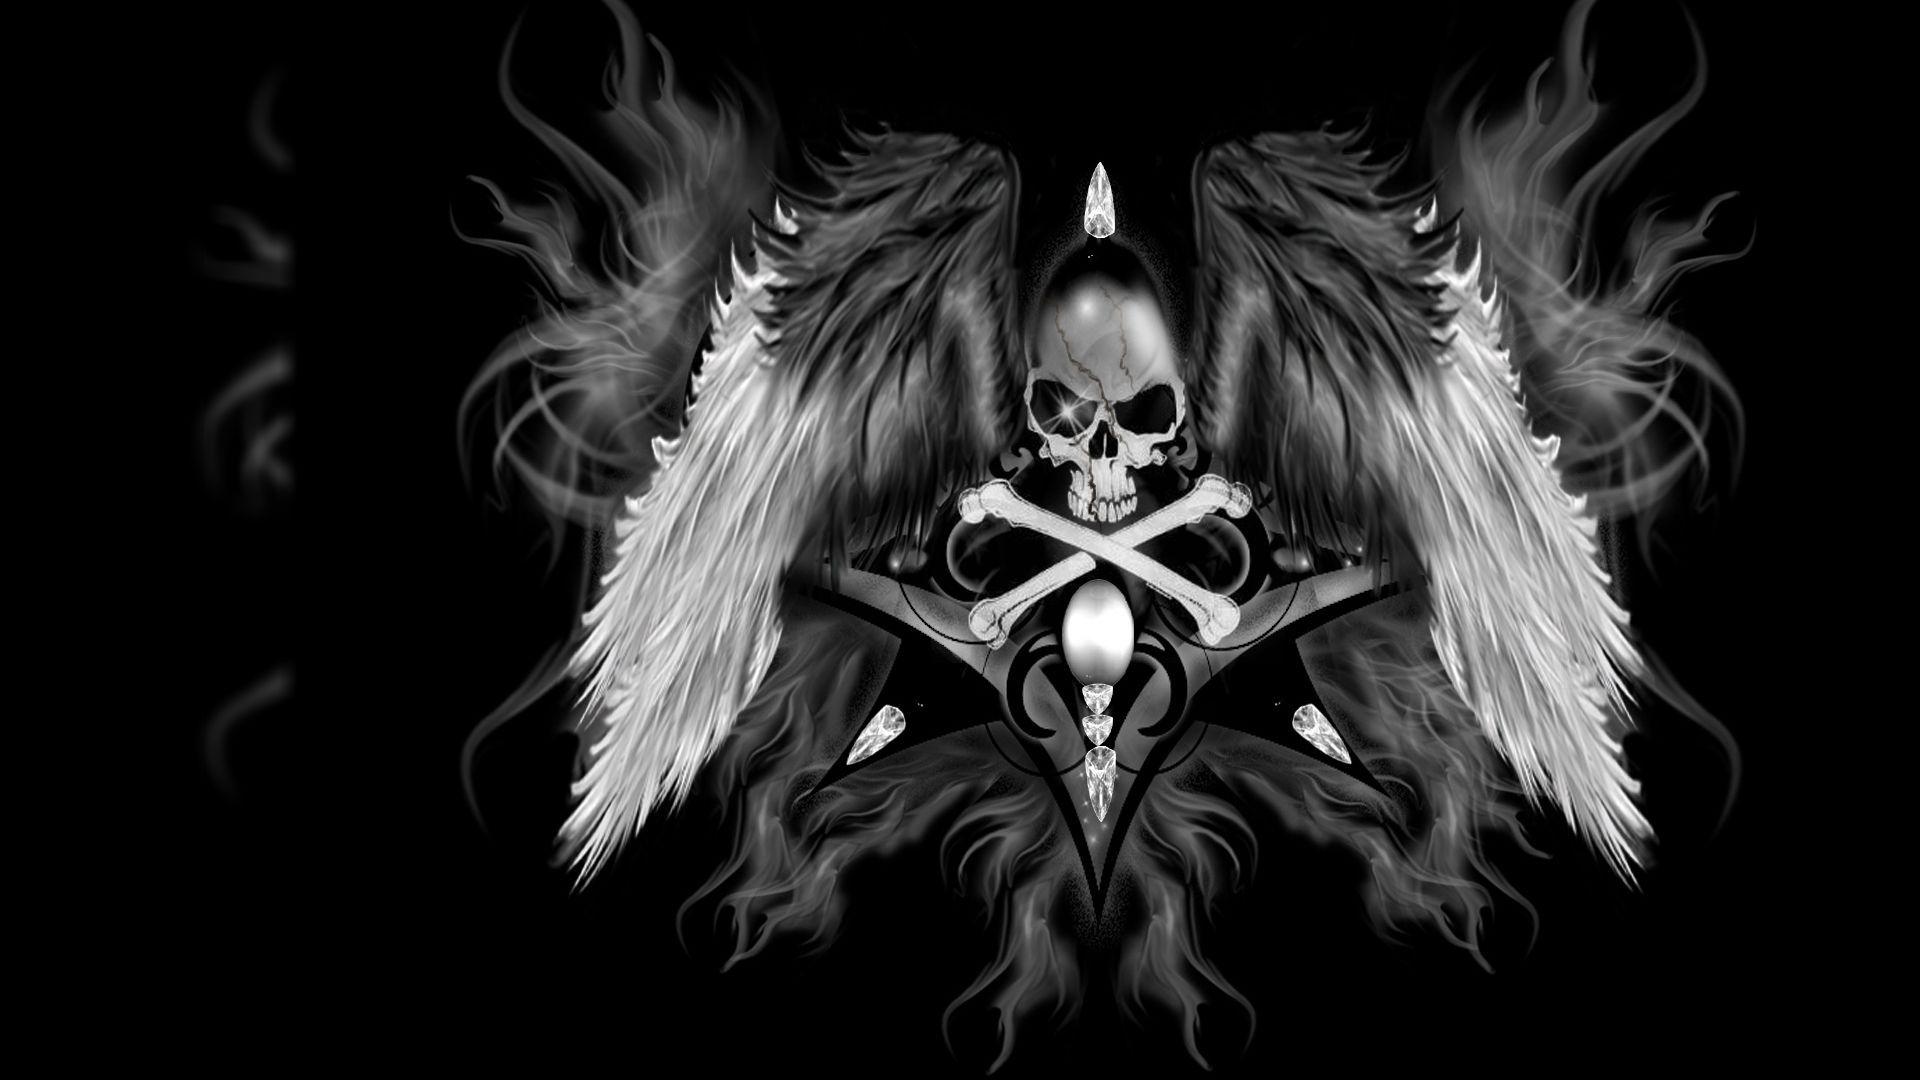 image For > Awesome Skull Wallpaper HD. Skulls & Things